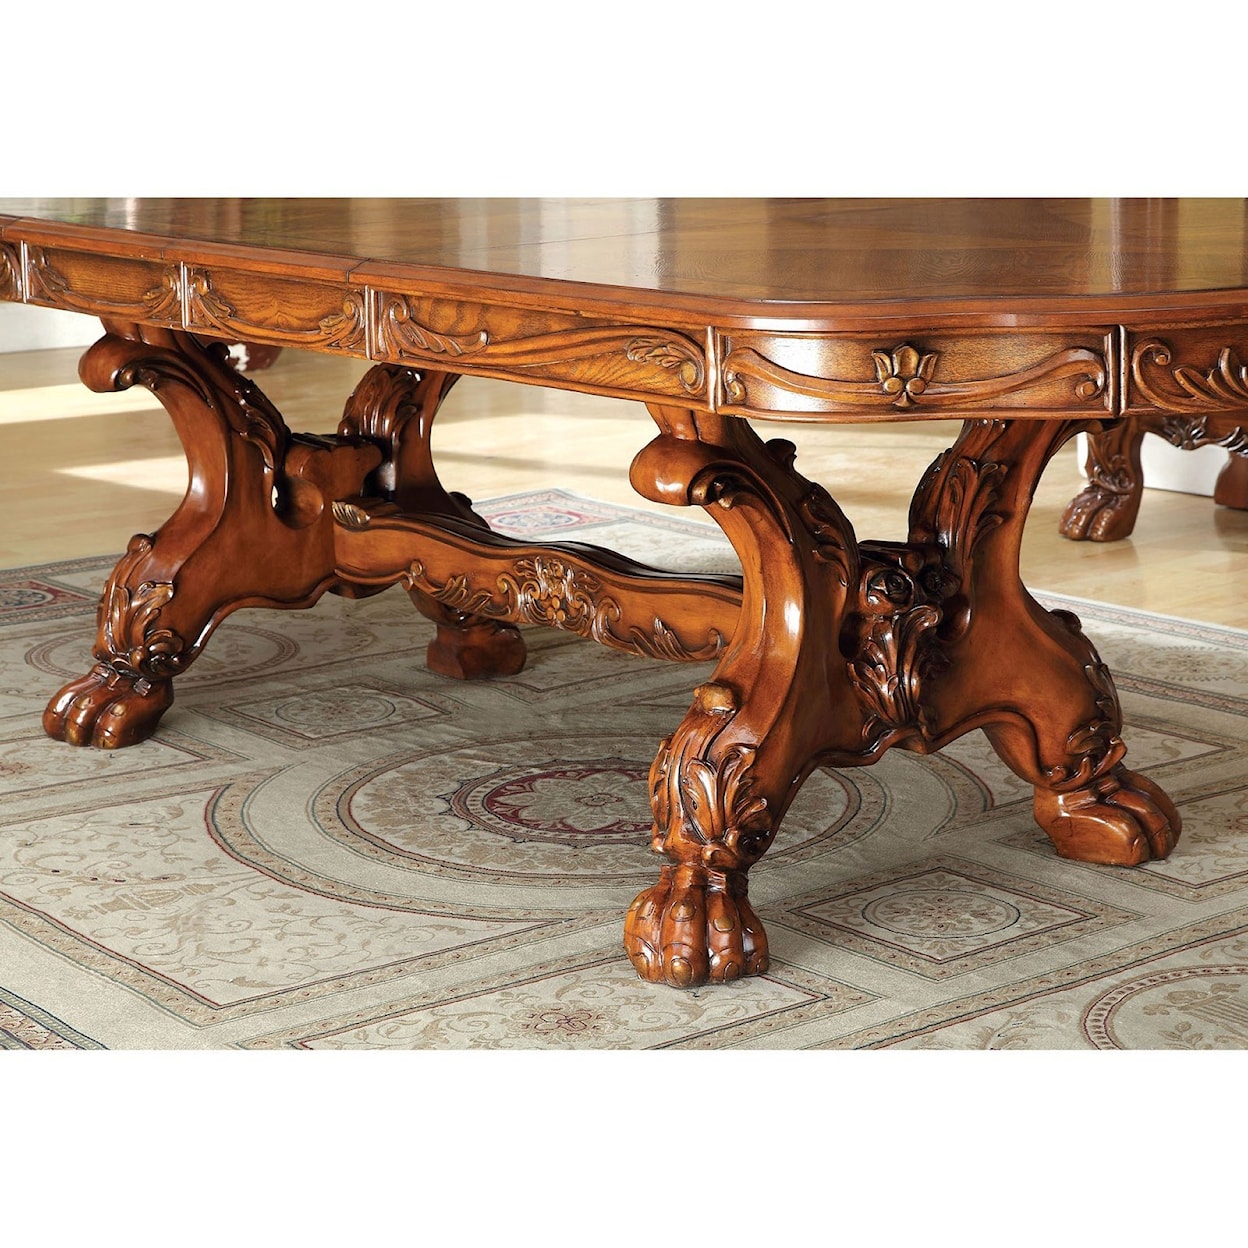 Furniture of America Medieve Dining Table